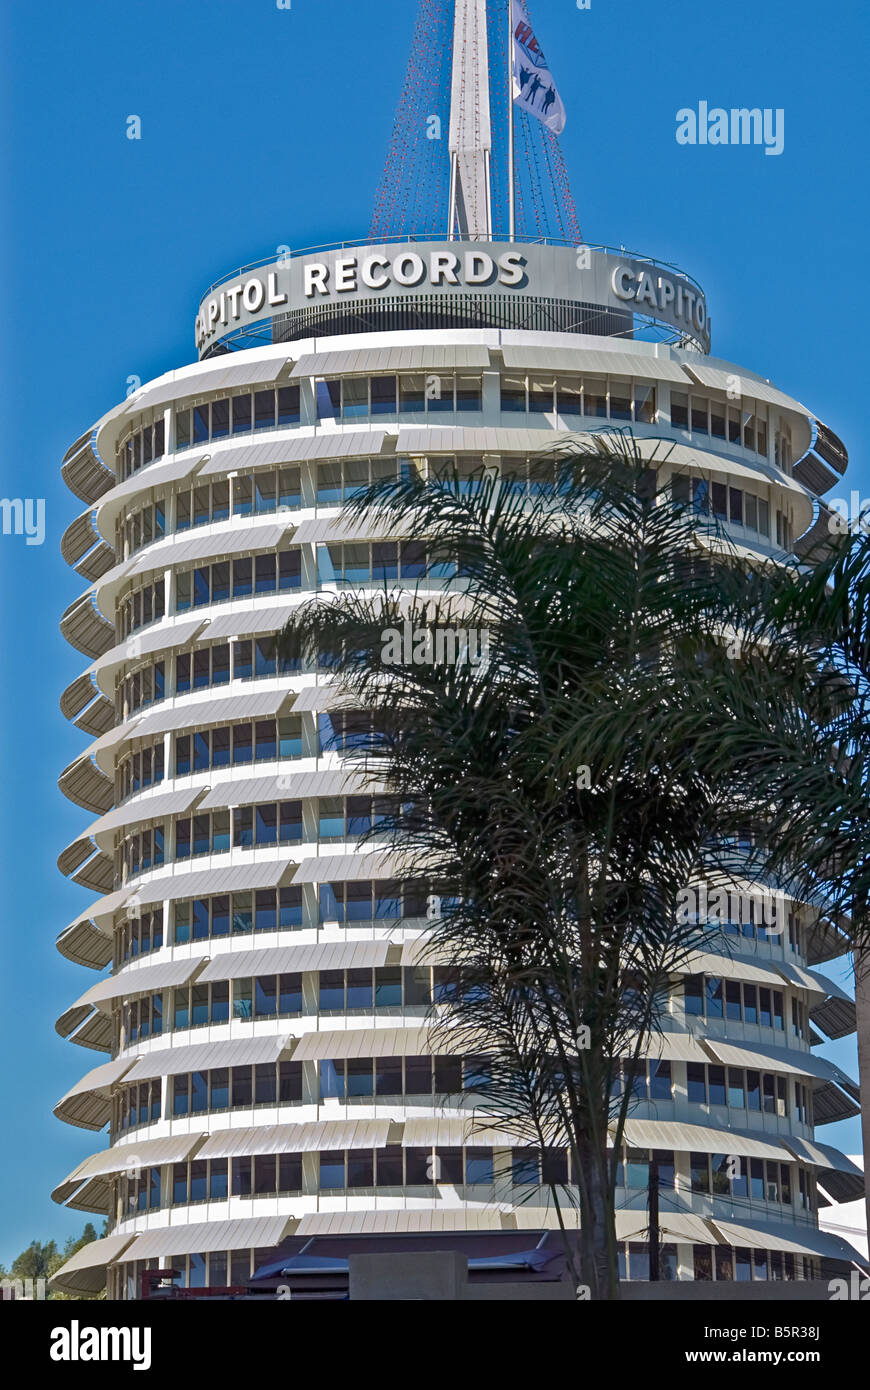 Capitol Records major United States based record label, owned by EMI  Hollywood, Los Angeles CA California headquarters building Stock Photo -  Alamy